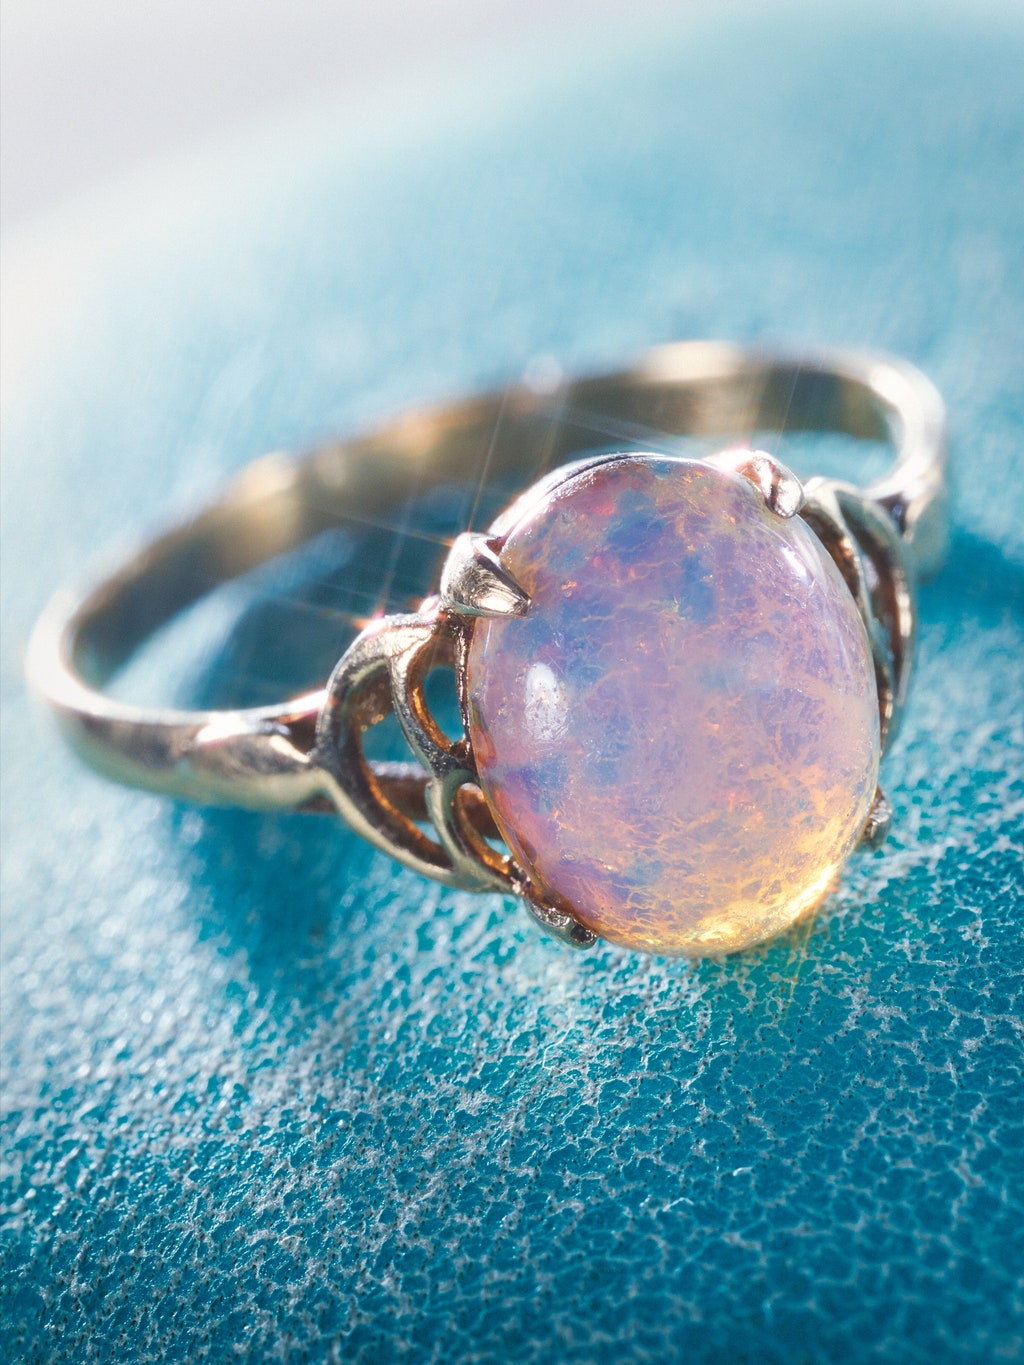 An image of a ring with a large iridescent stone. Photograph by Kyoko Hamada for The New Yorker.